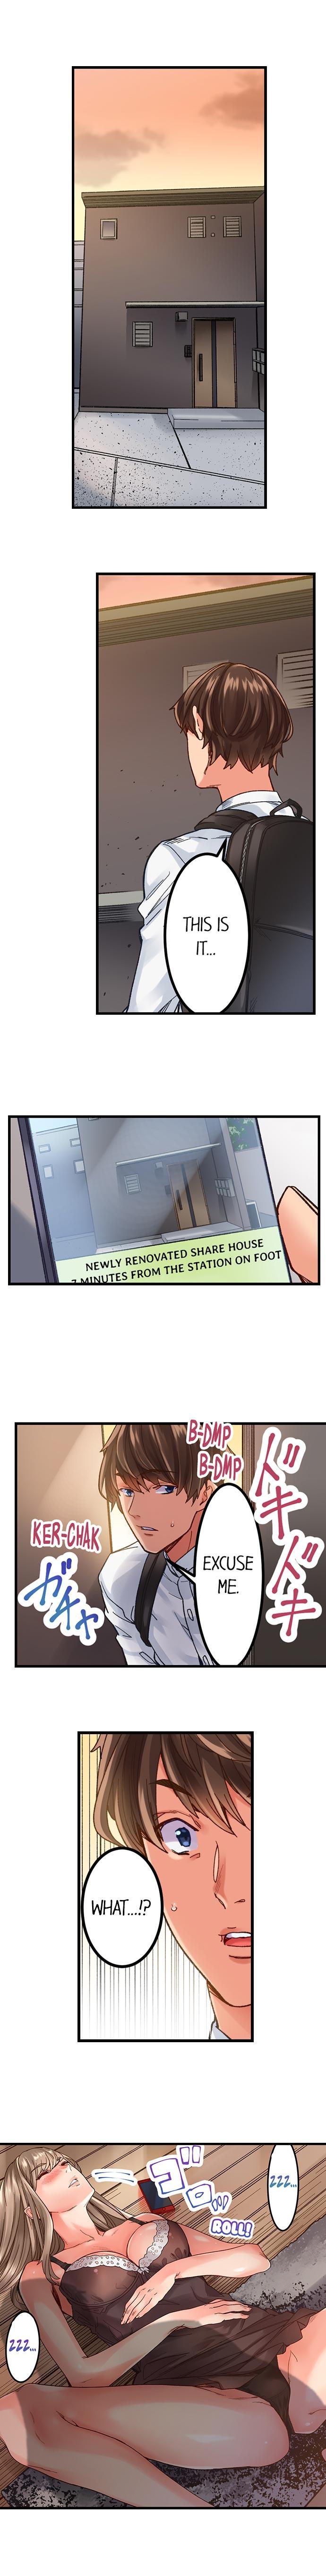 Forbidden The Share House’s Secret Rule Sucks - Page 3